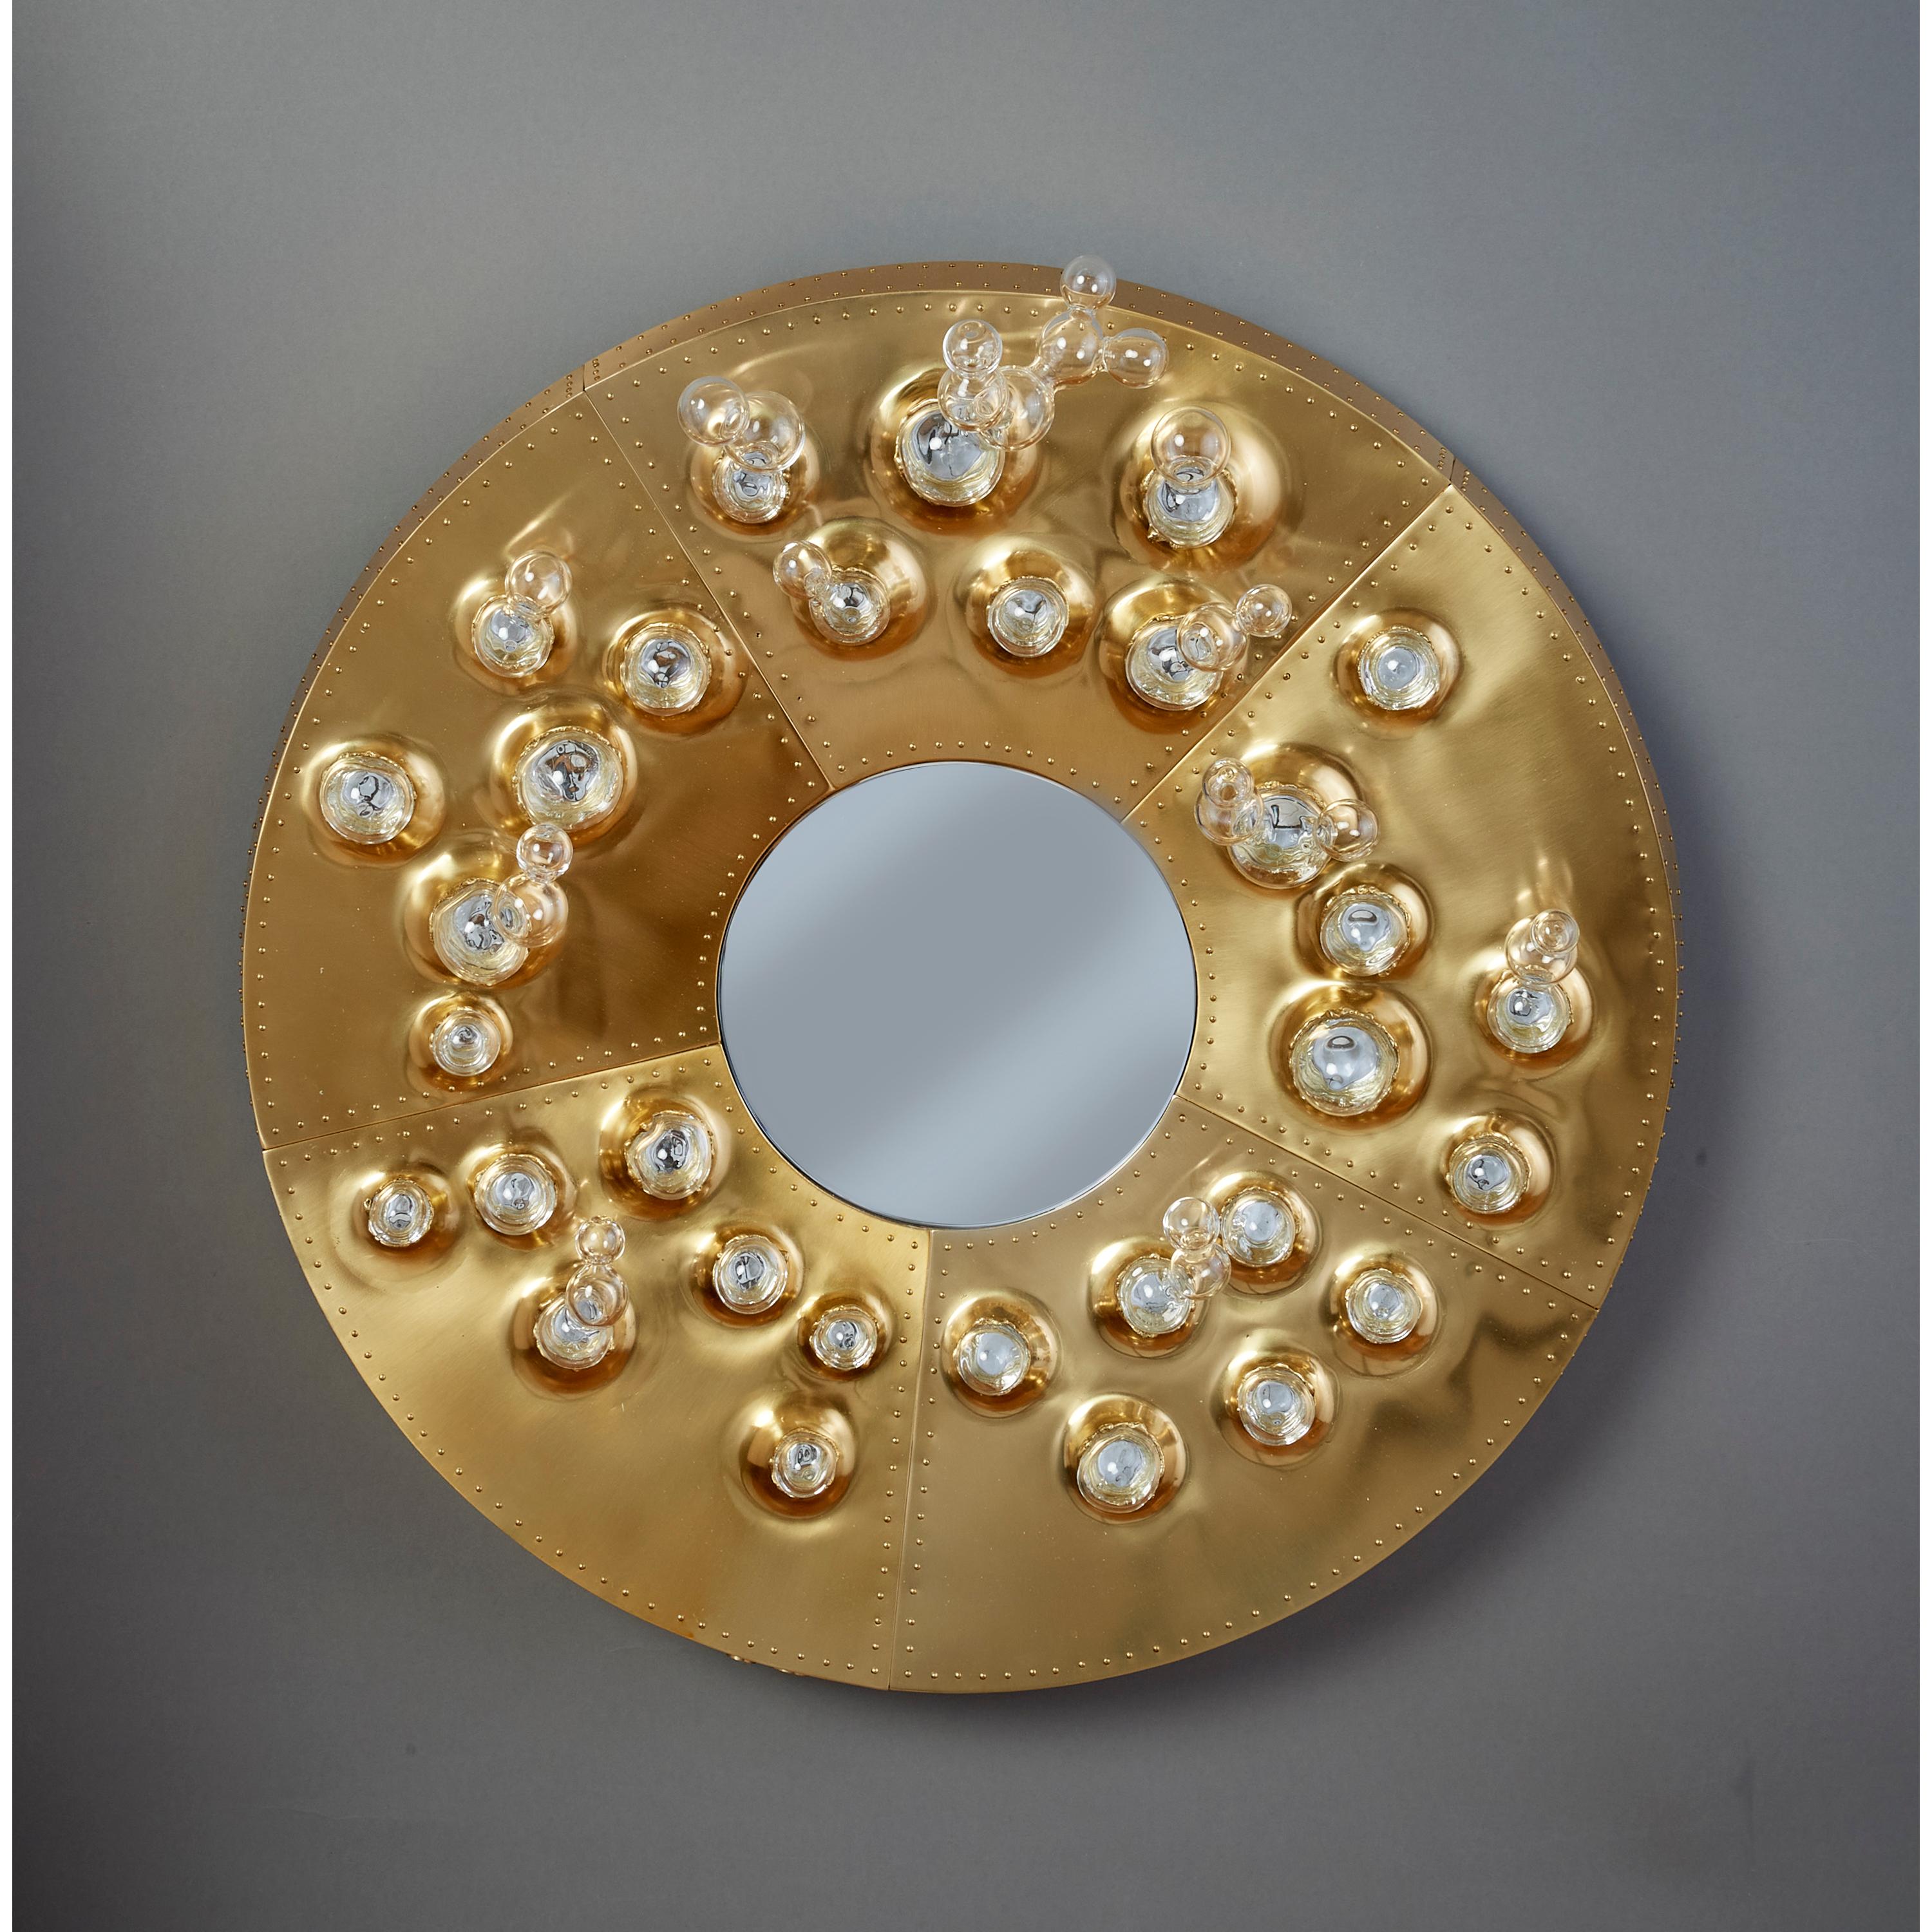 Roberto Rida (b. 1943) and Simone Crestani (b. 1984)

An exceptional hand-made mirror by modern master Roberto Rida and virtuoso glass artist Simone Crestani. A round, lustrous gilt bronze frame by Rida, segmented into deep panels with decorative